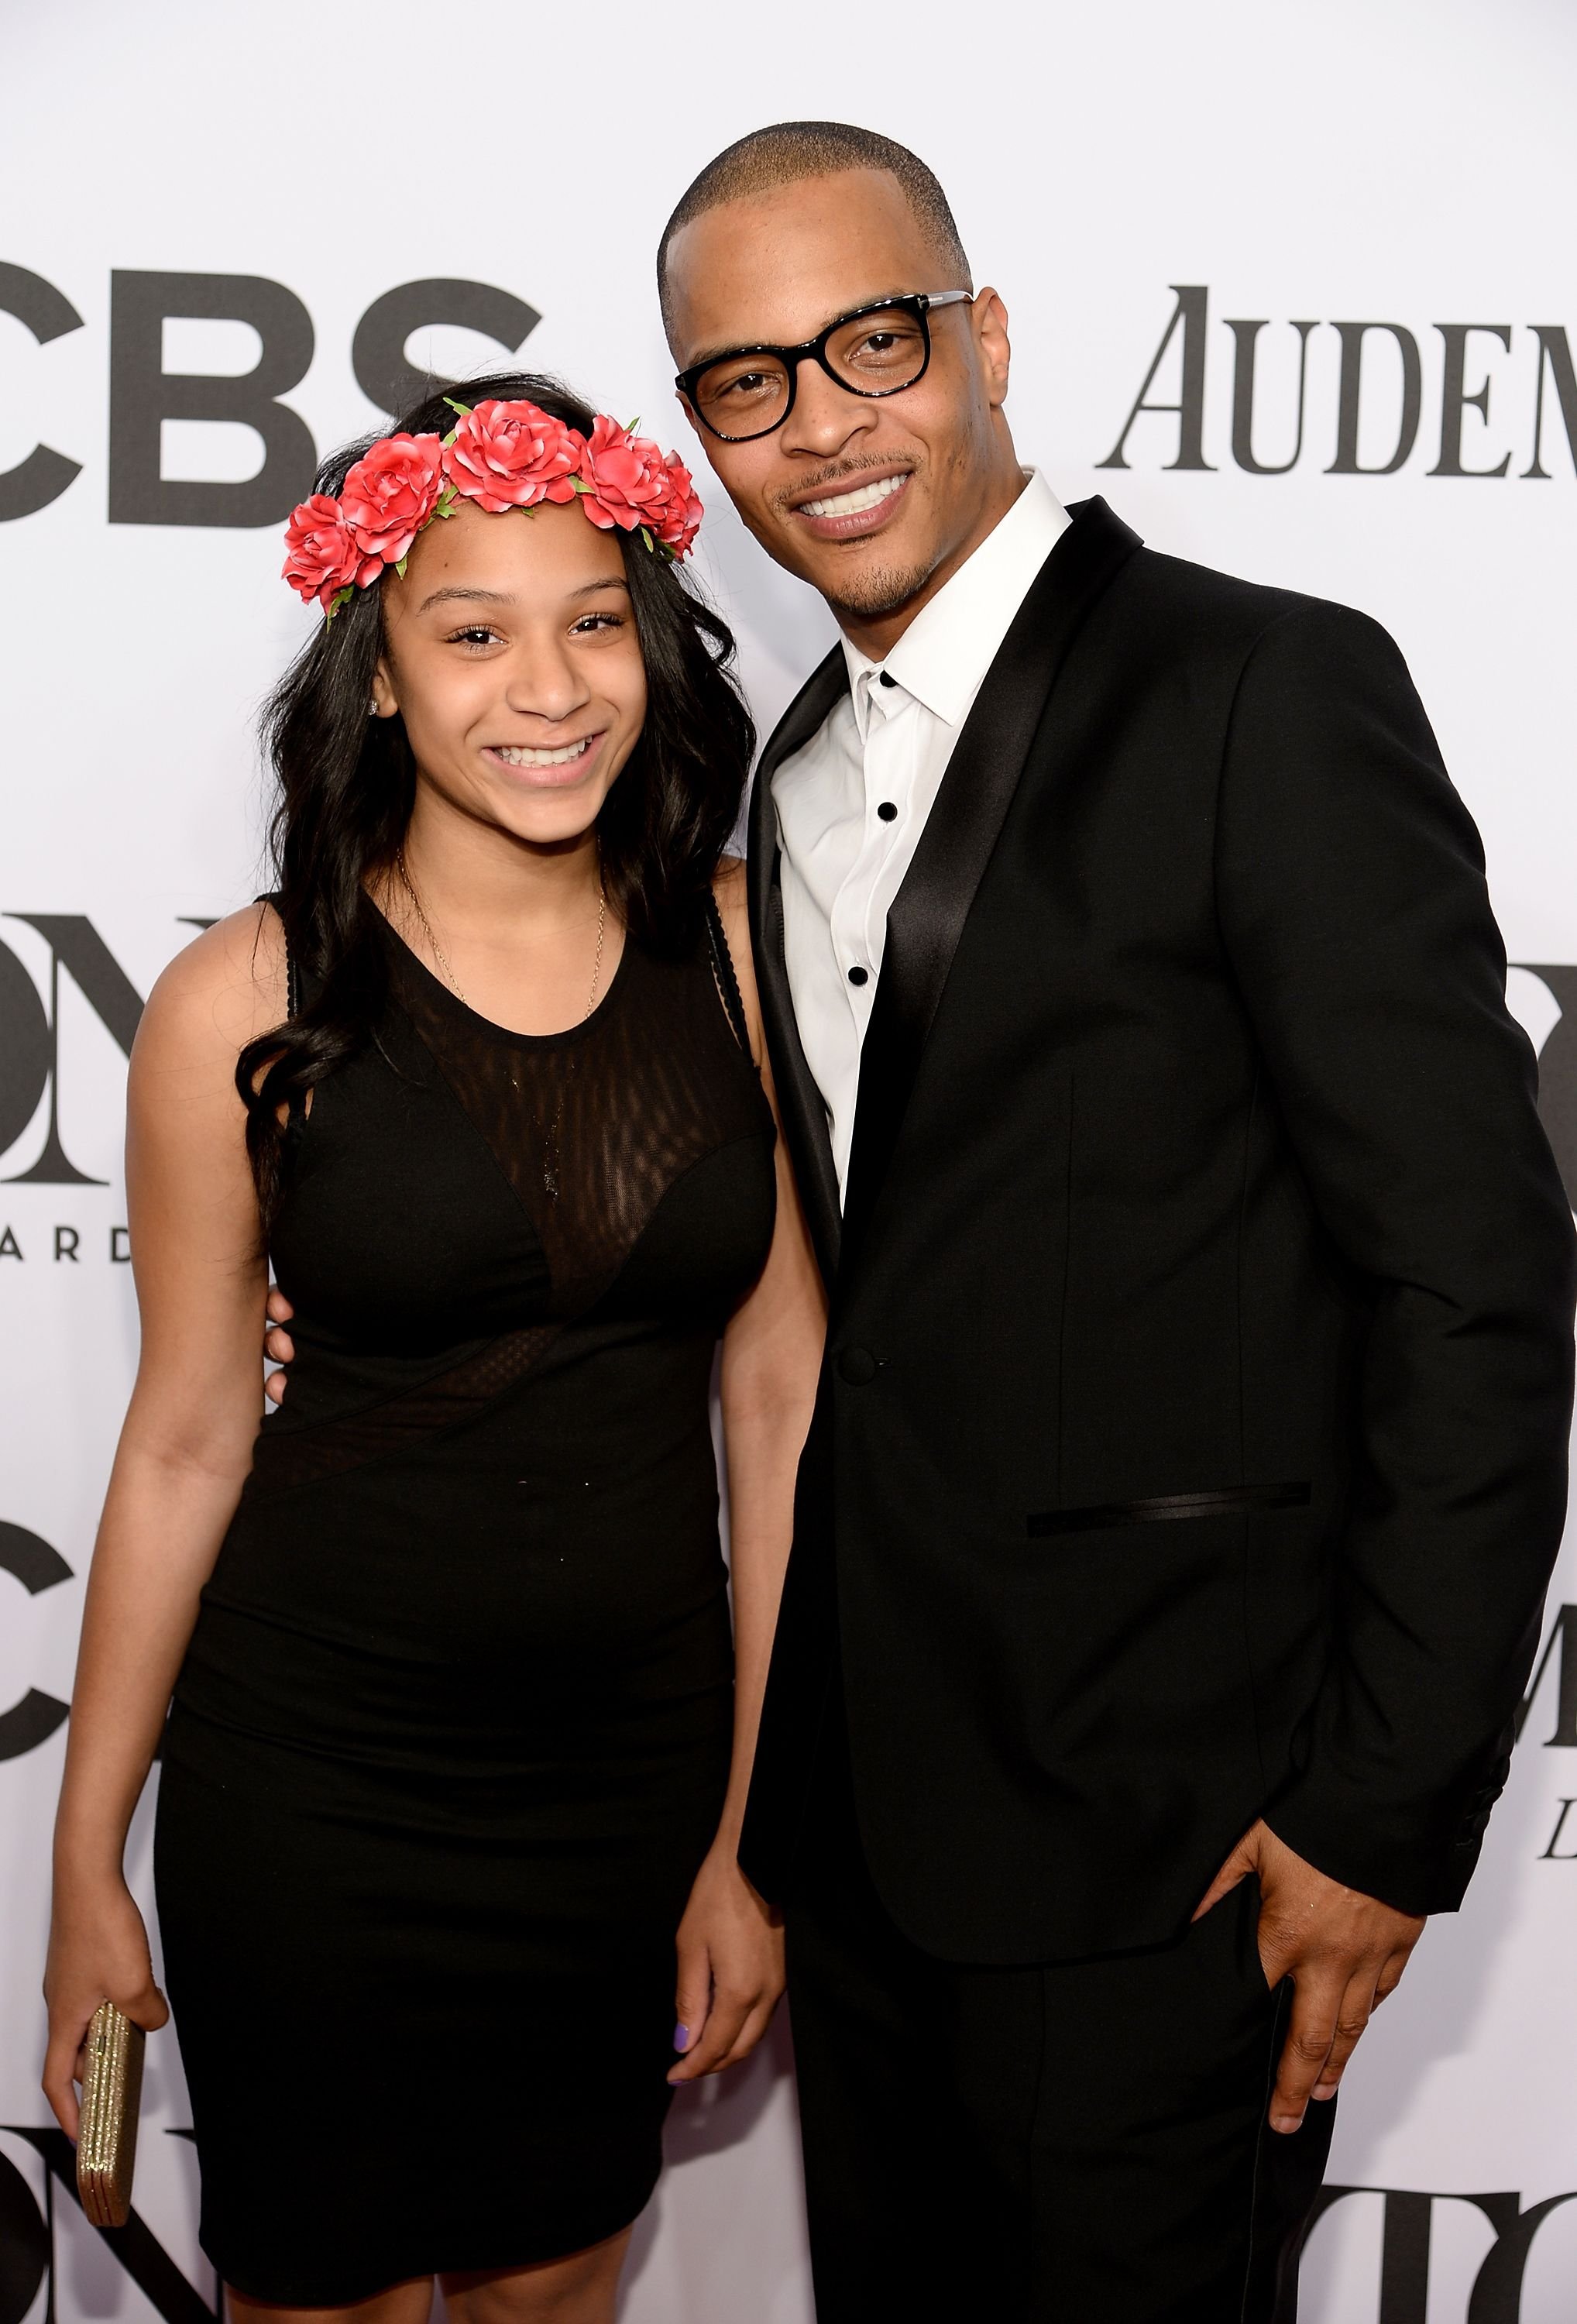 T.I. Harris and daughter Deyjah at the 68th Annual Tony Awards in 2014 in New York City | Source: Getty Images